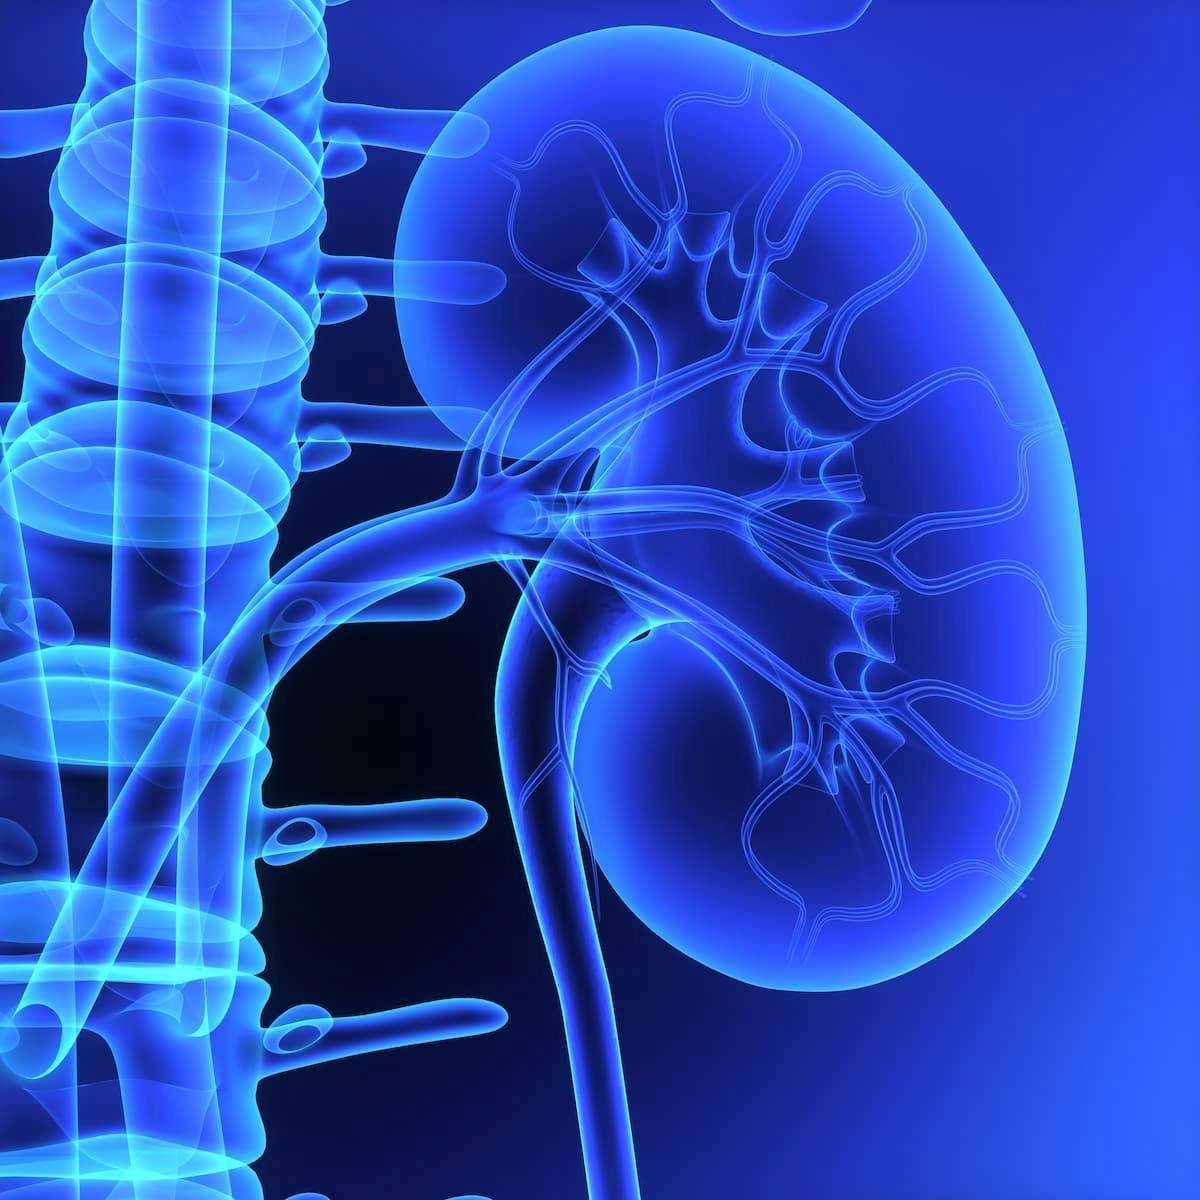 The addition of cabozantinib to nivolumab and ipilimumab also appears to improve responses in patients with advanced renal cell carcinoma in the phase 3 COSMIC-313 trial.